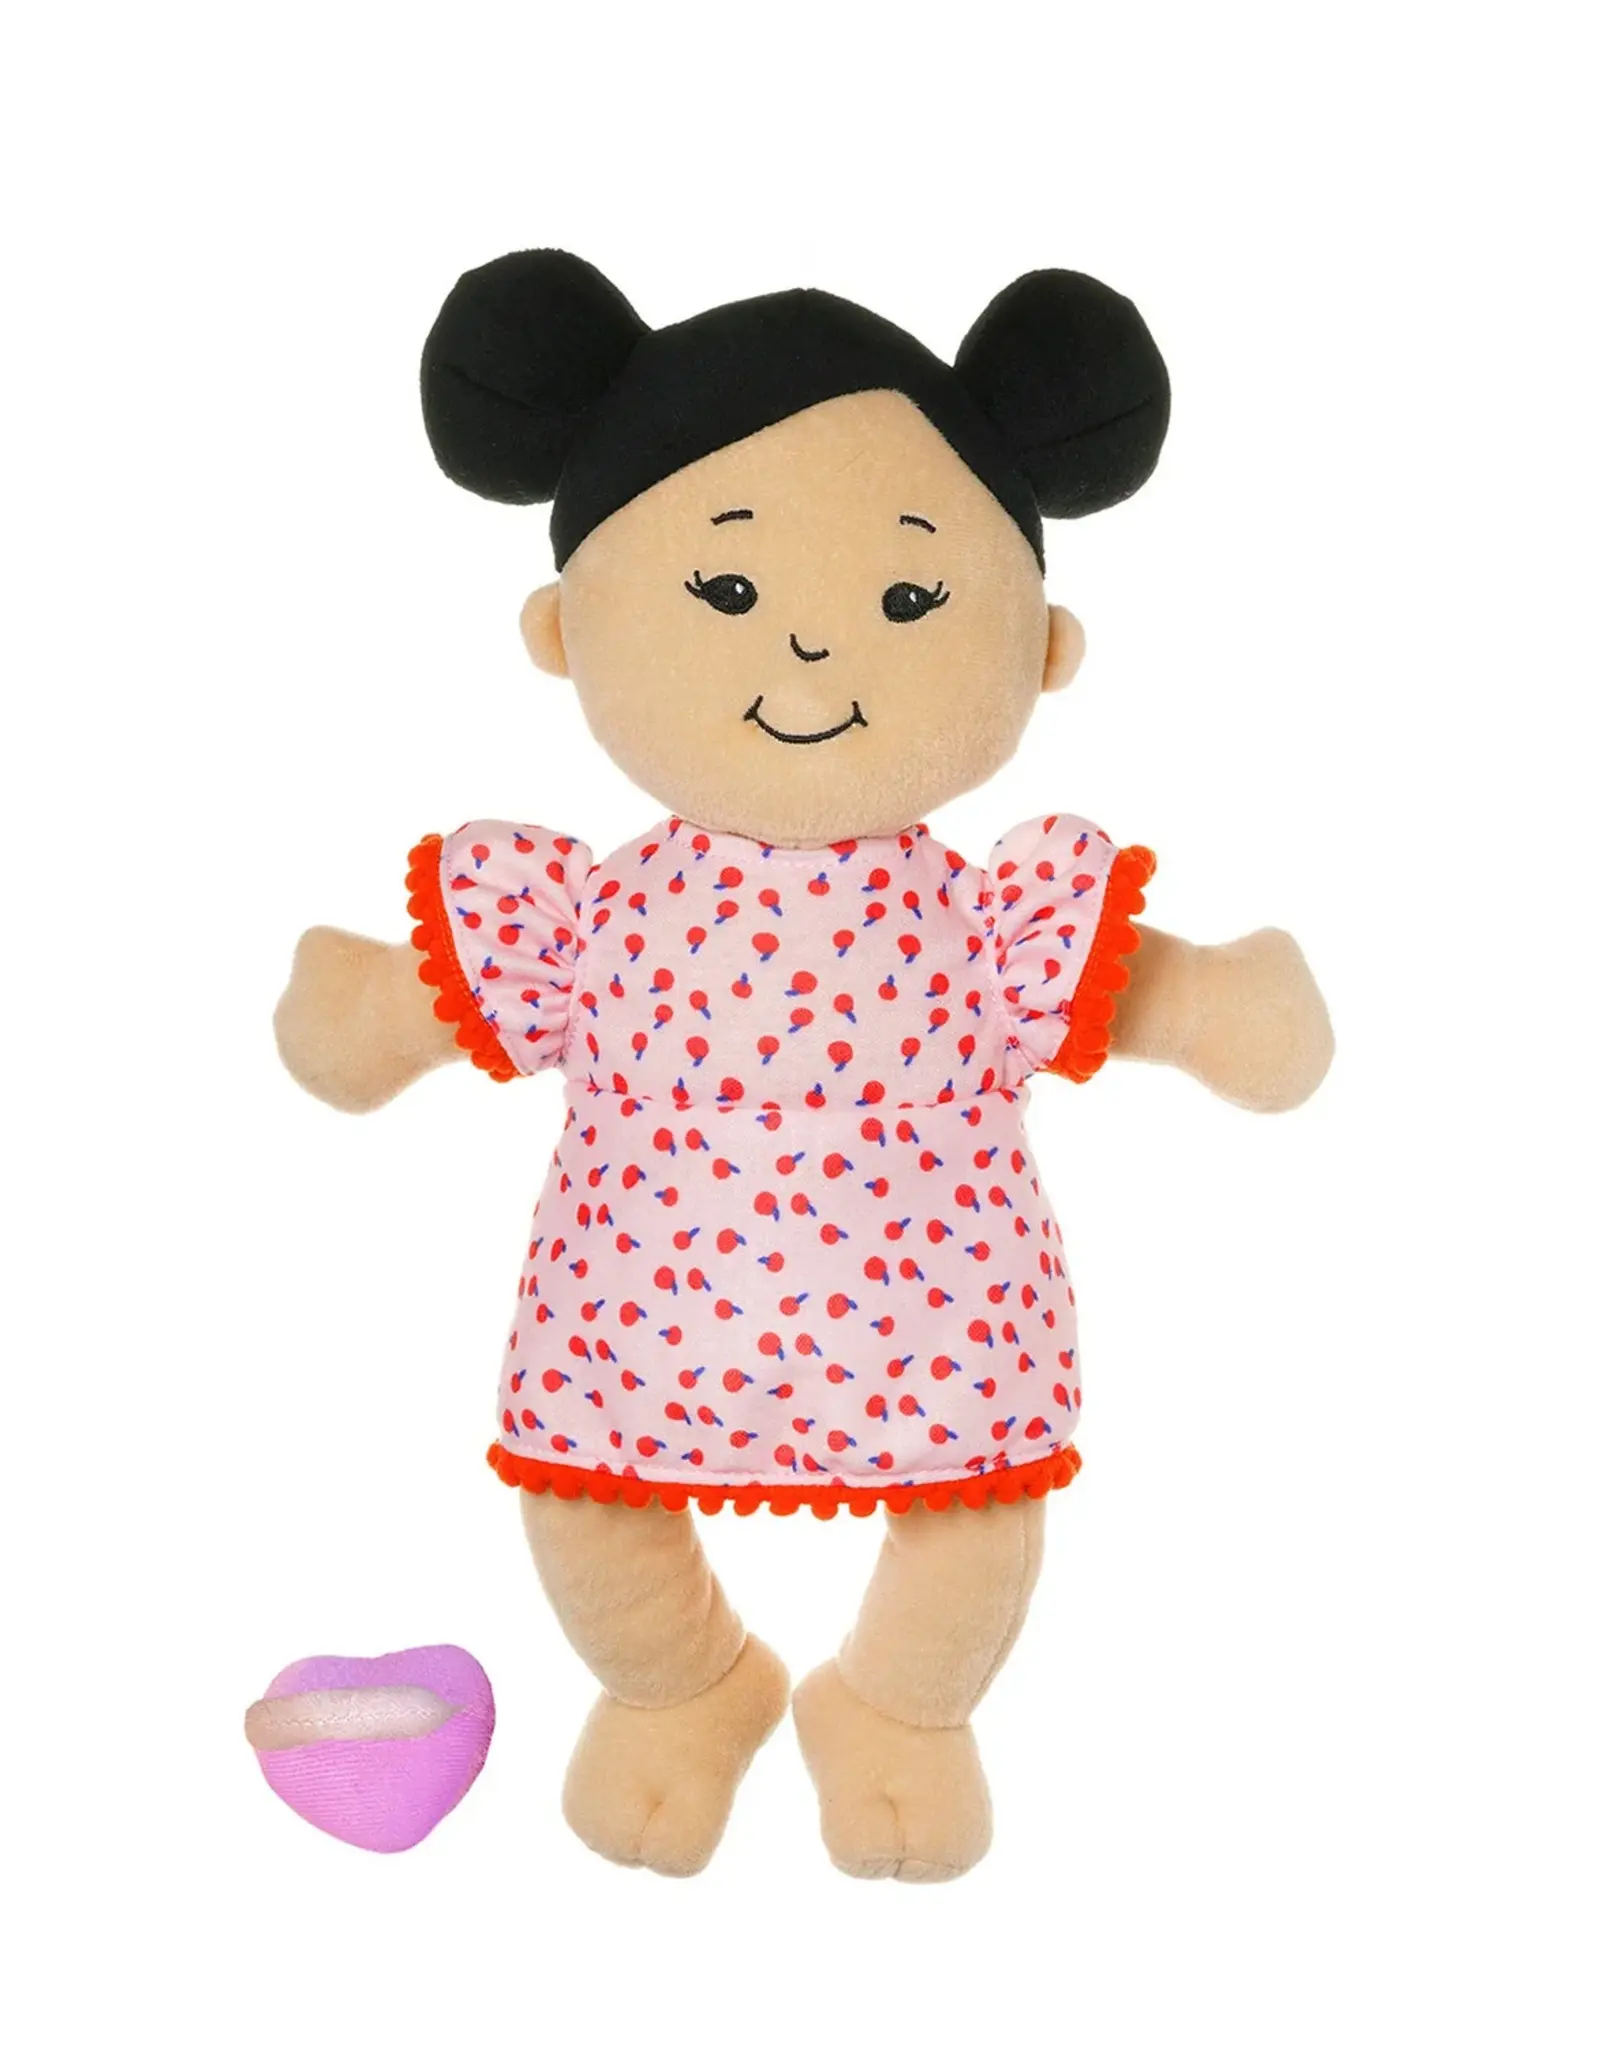 The Manhattan Toy Company Wee Baby Stella Light Beige with Black Buns